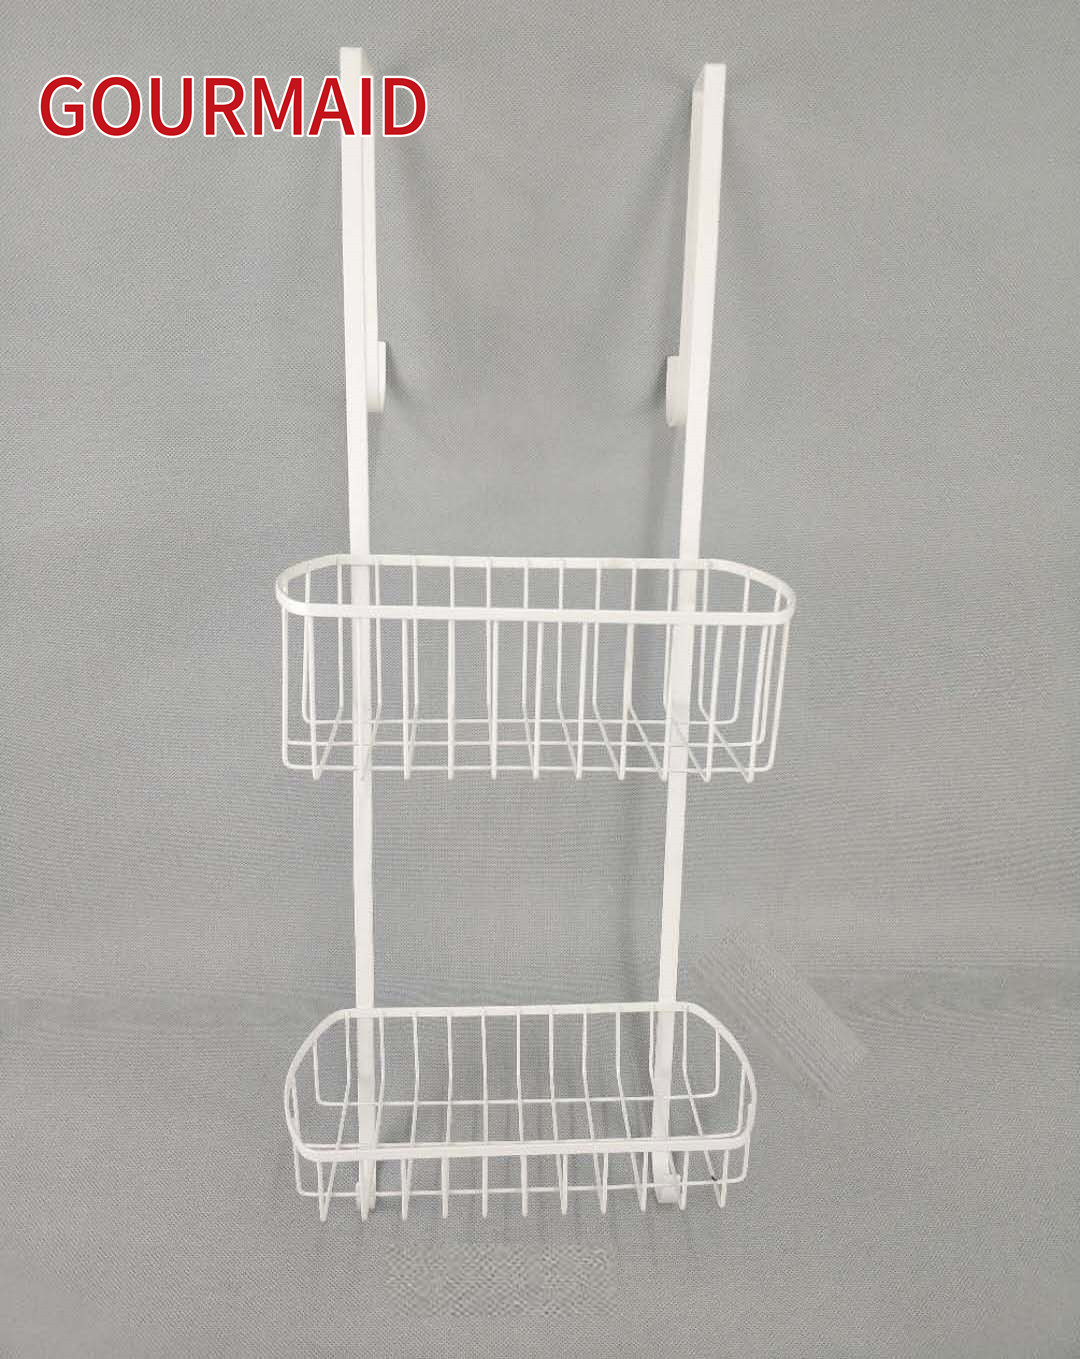 Special Design for Free Standing Shower Caddy - 2 Tier Over Screen Shower Caddy – Light Houseware